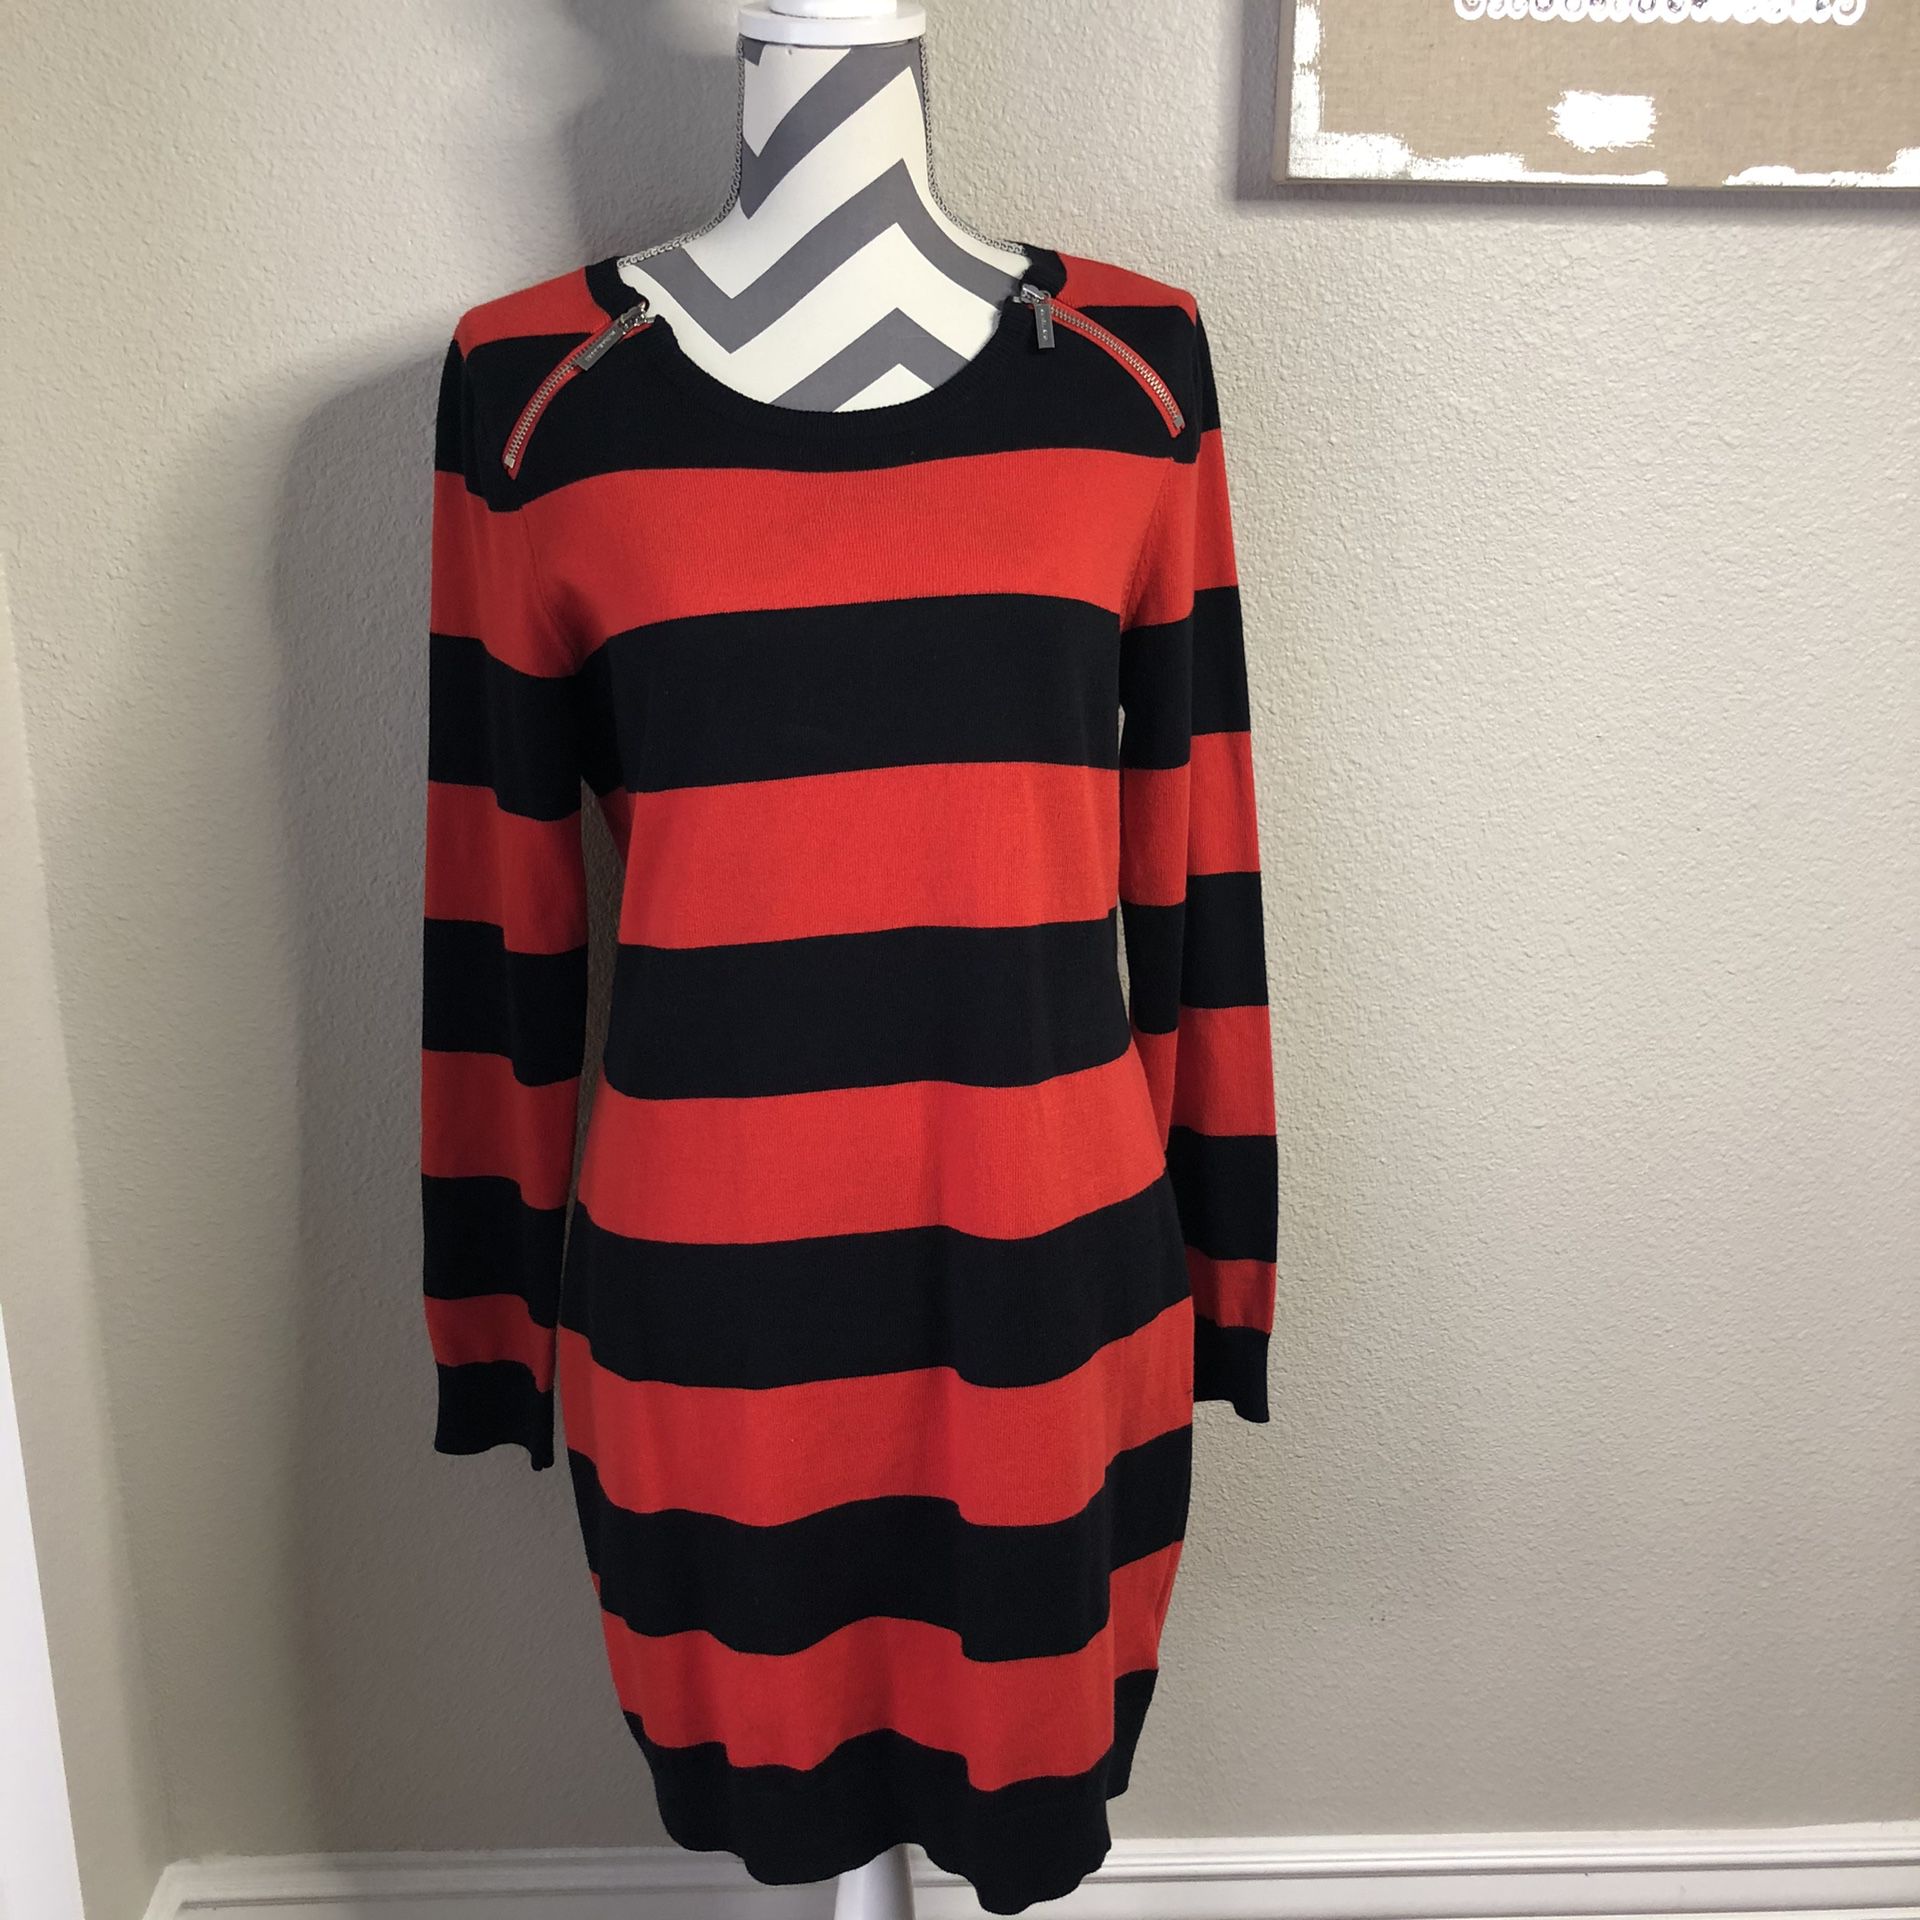 Michael Kors red and black sweater dress size L